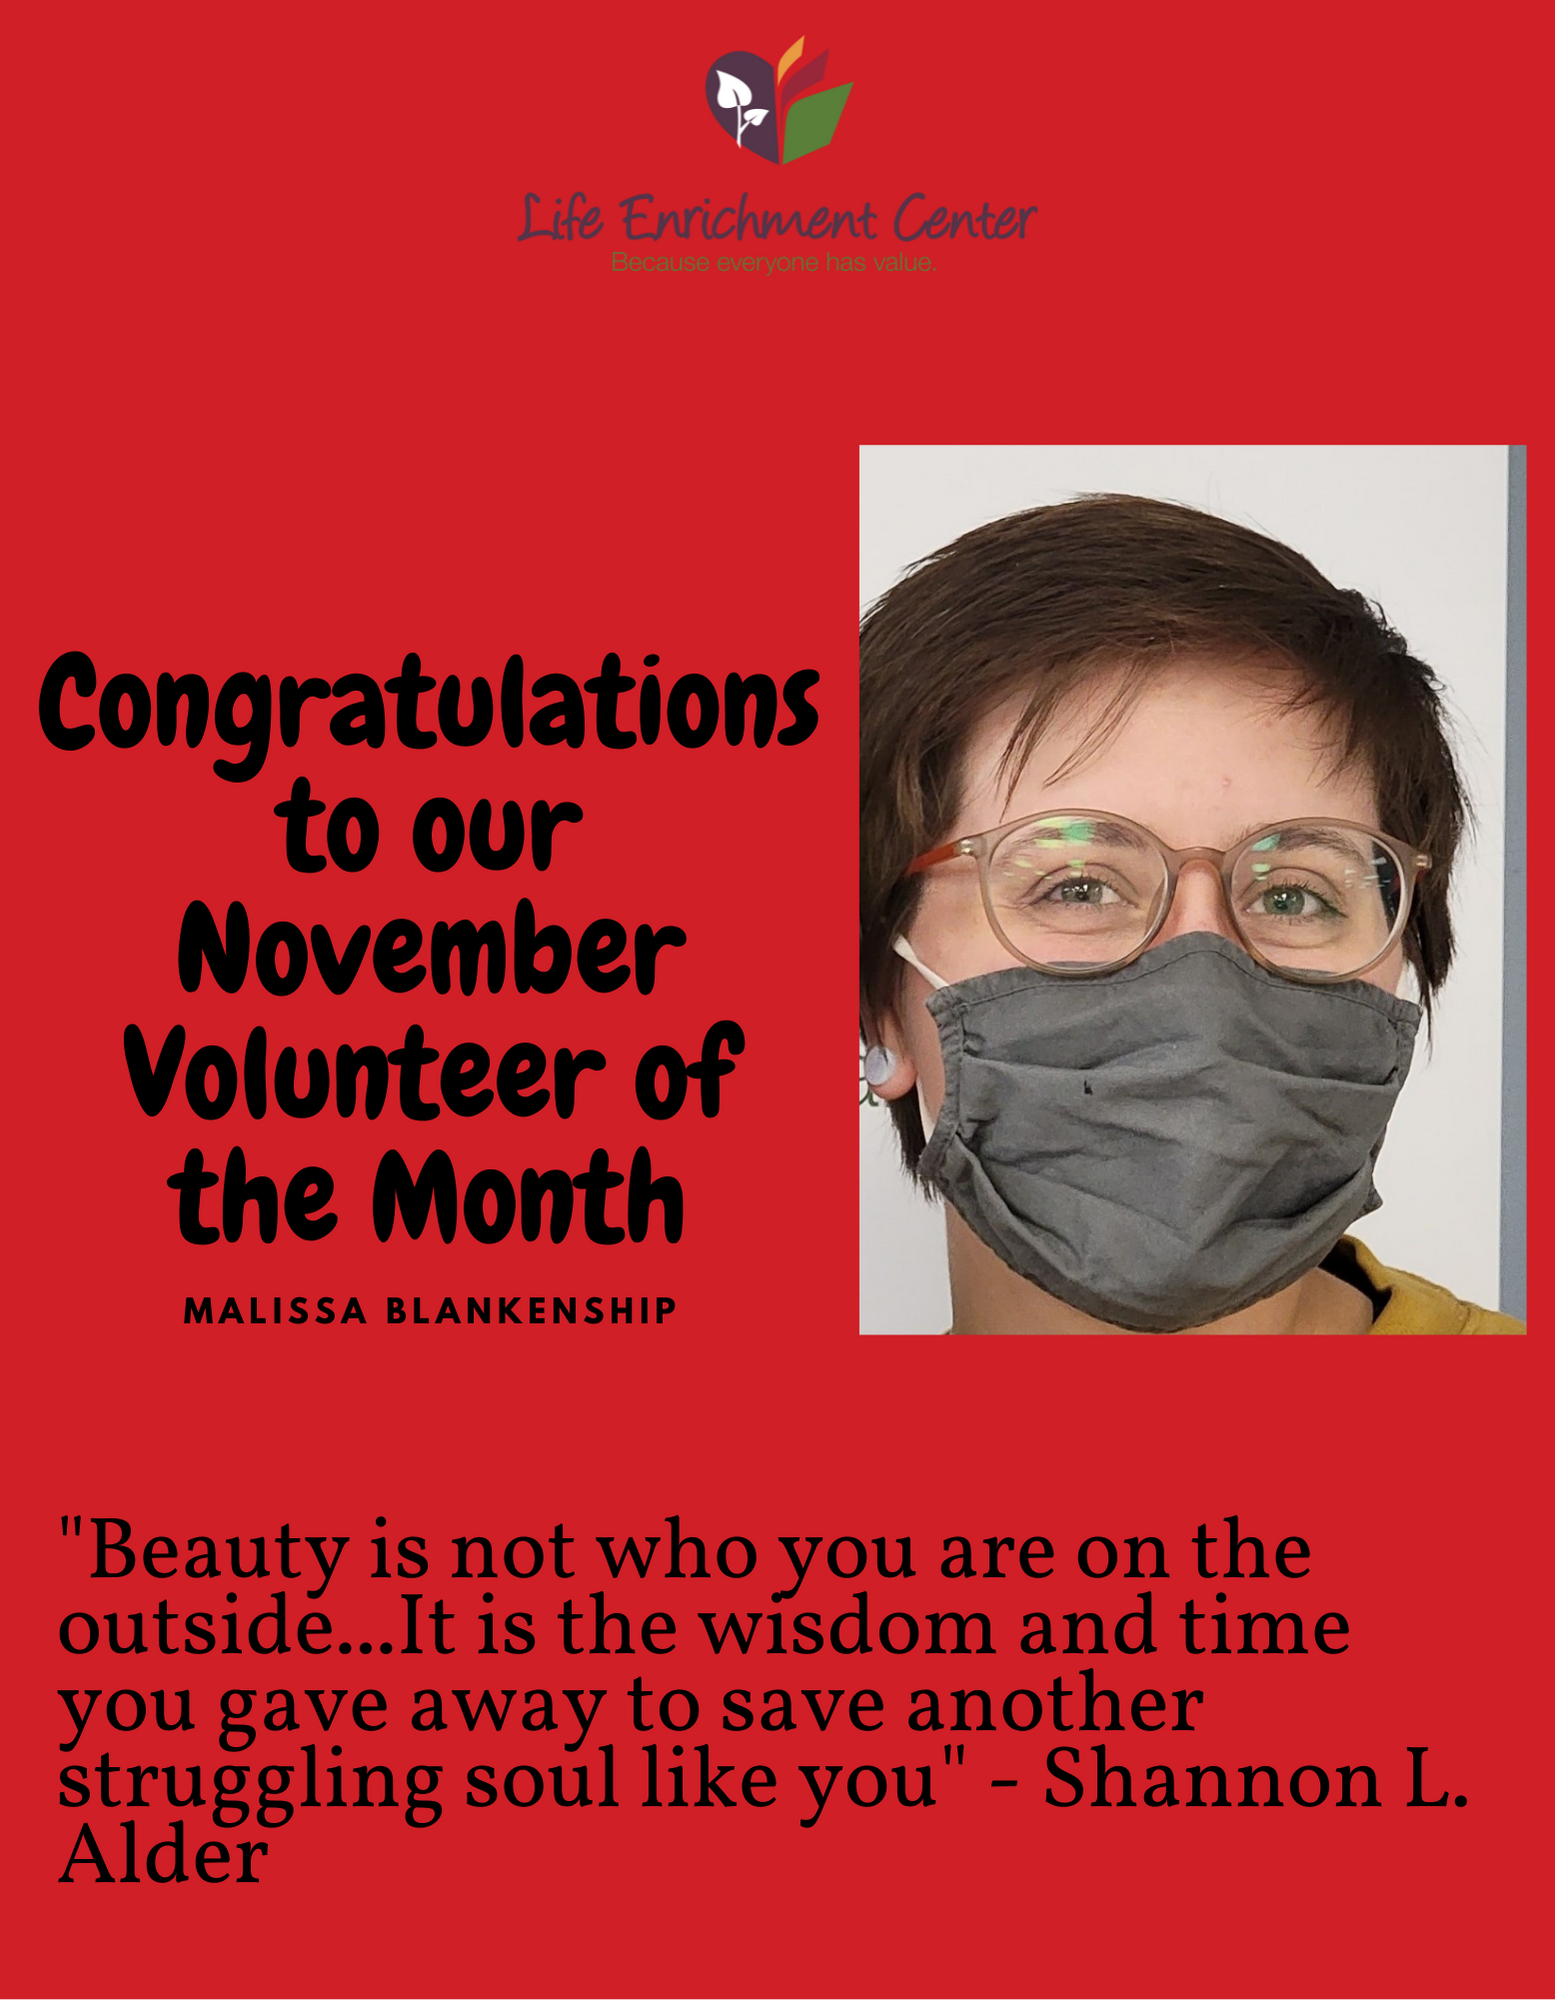 Congratulations to our November Volunteer of the Month Malissa Blankenship